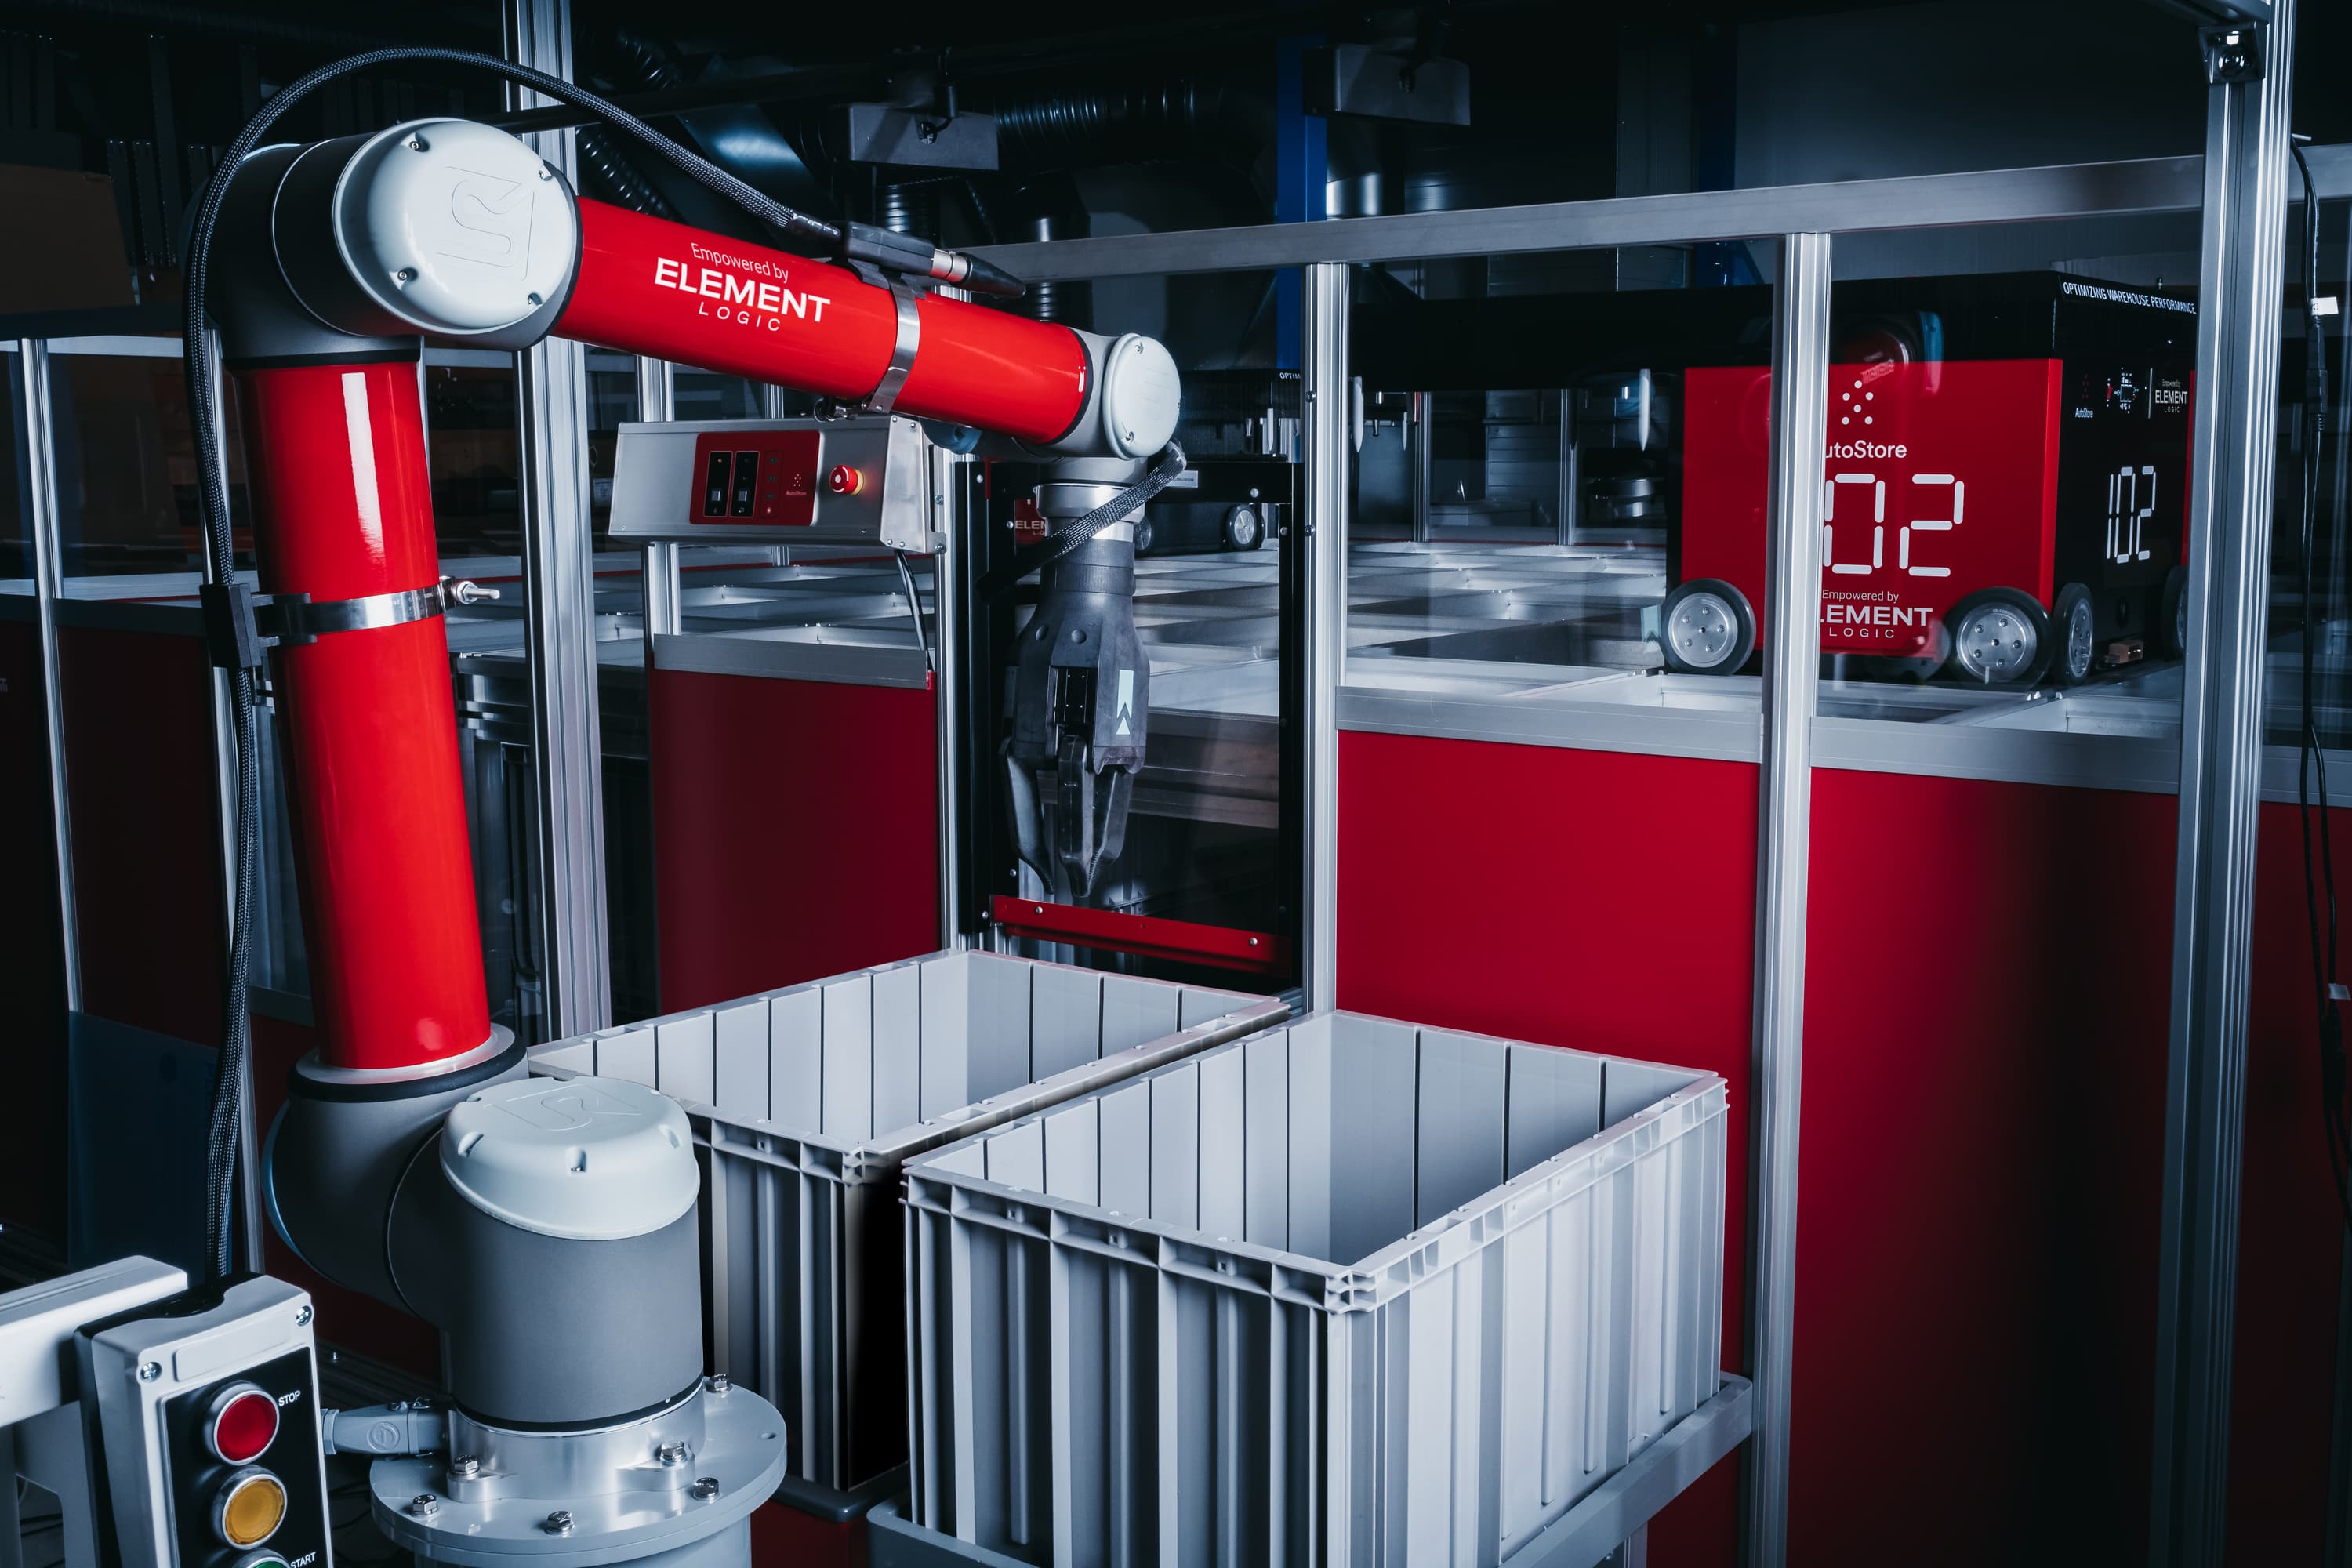 The Latest Article: Righthand robotics™ launches partner integrator program for robotic piece-picking deployments